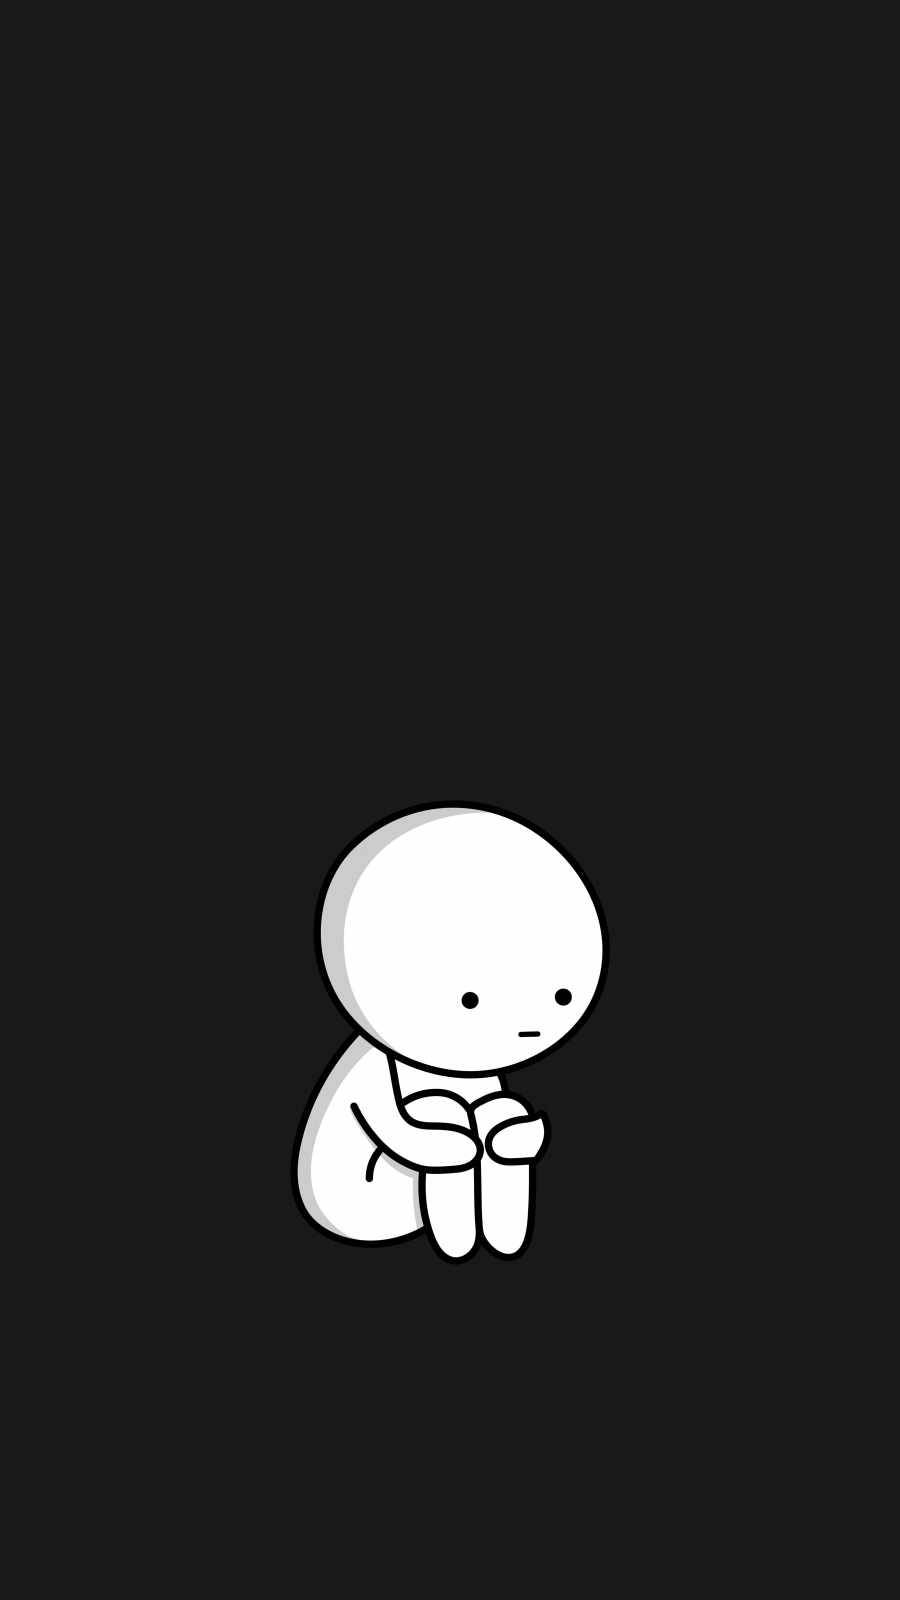 Sad & Lonely Person Iphone Wallpaper